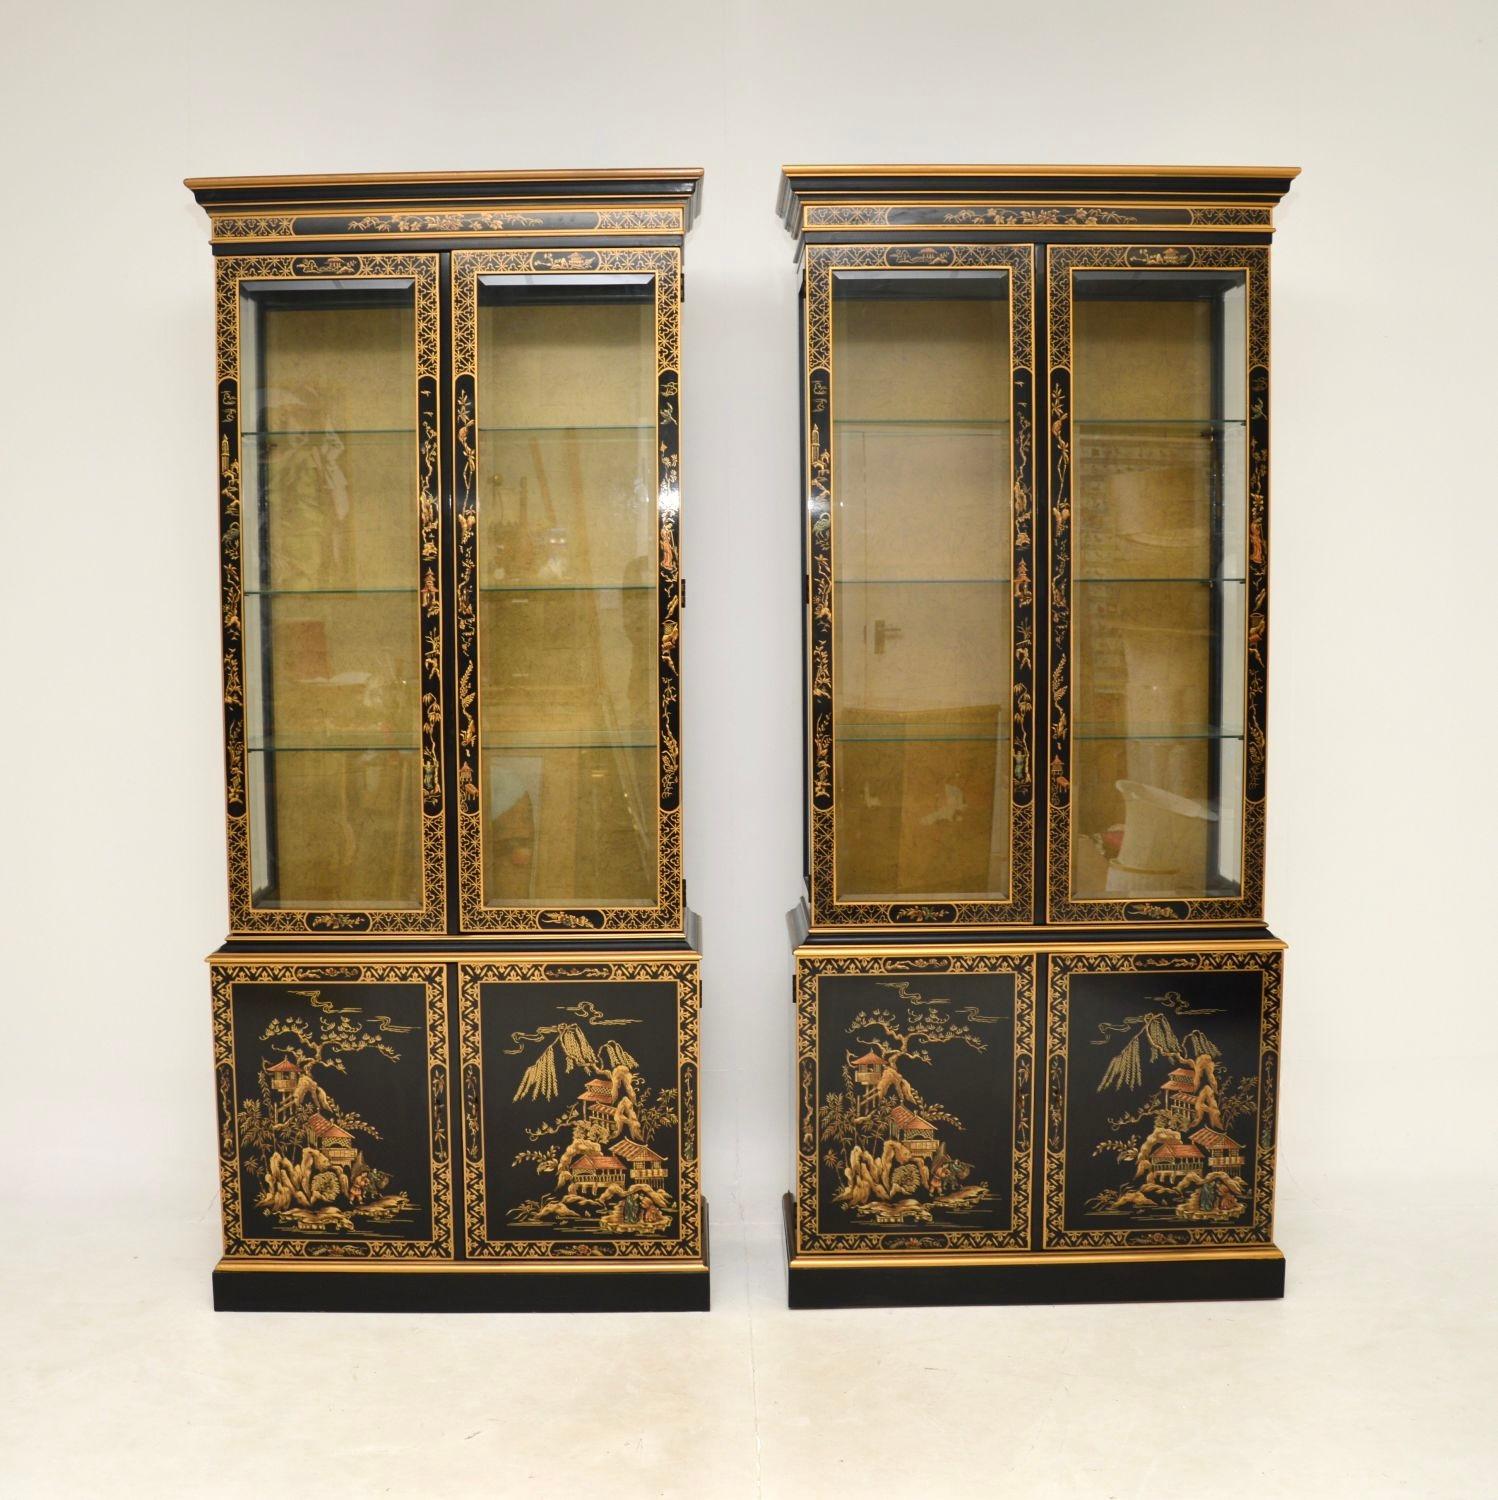 A stunning pair of antique Georgian style lacquered chinoiserie bookcases. They were made in the USA by Drexel, and they date from around the 1970’s.

These are of superb quality, we obtained them privately from an amazing private residence in